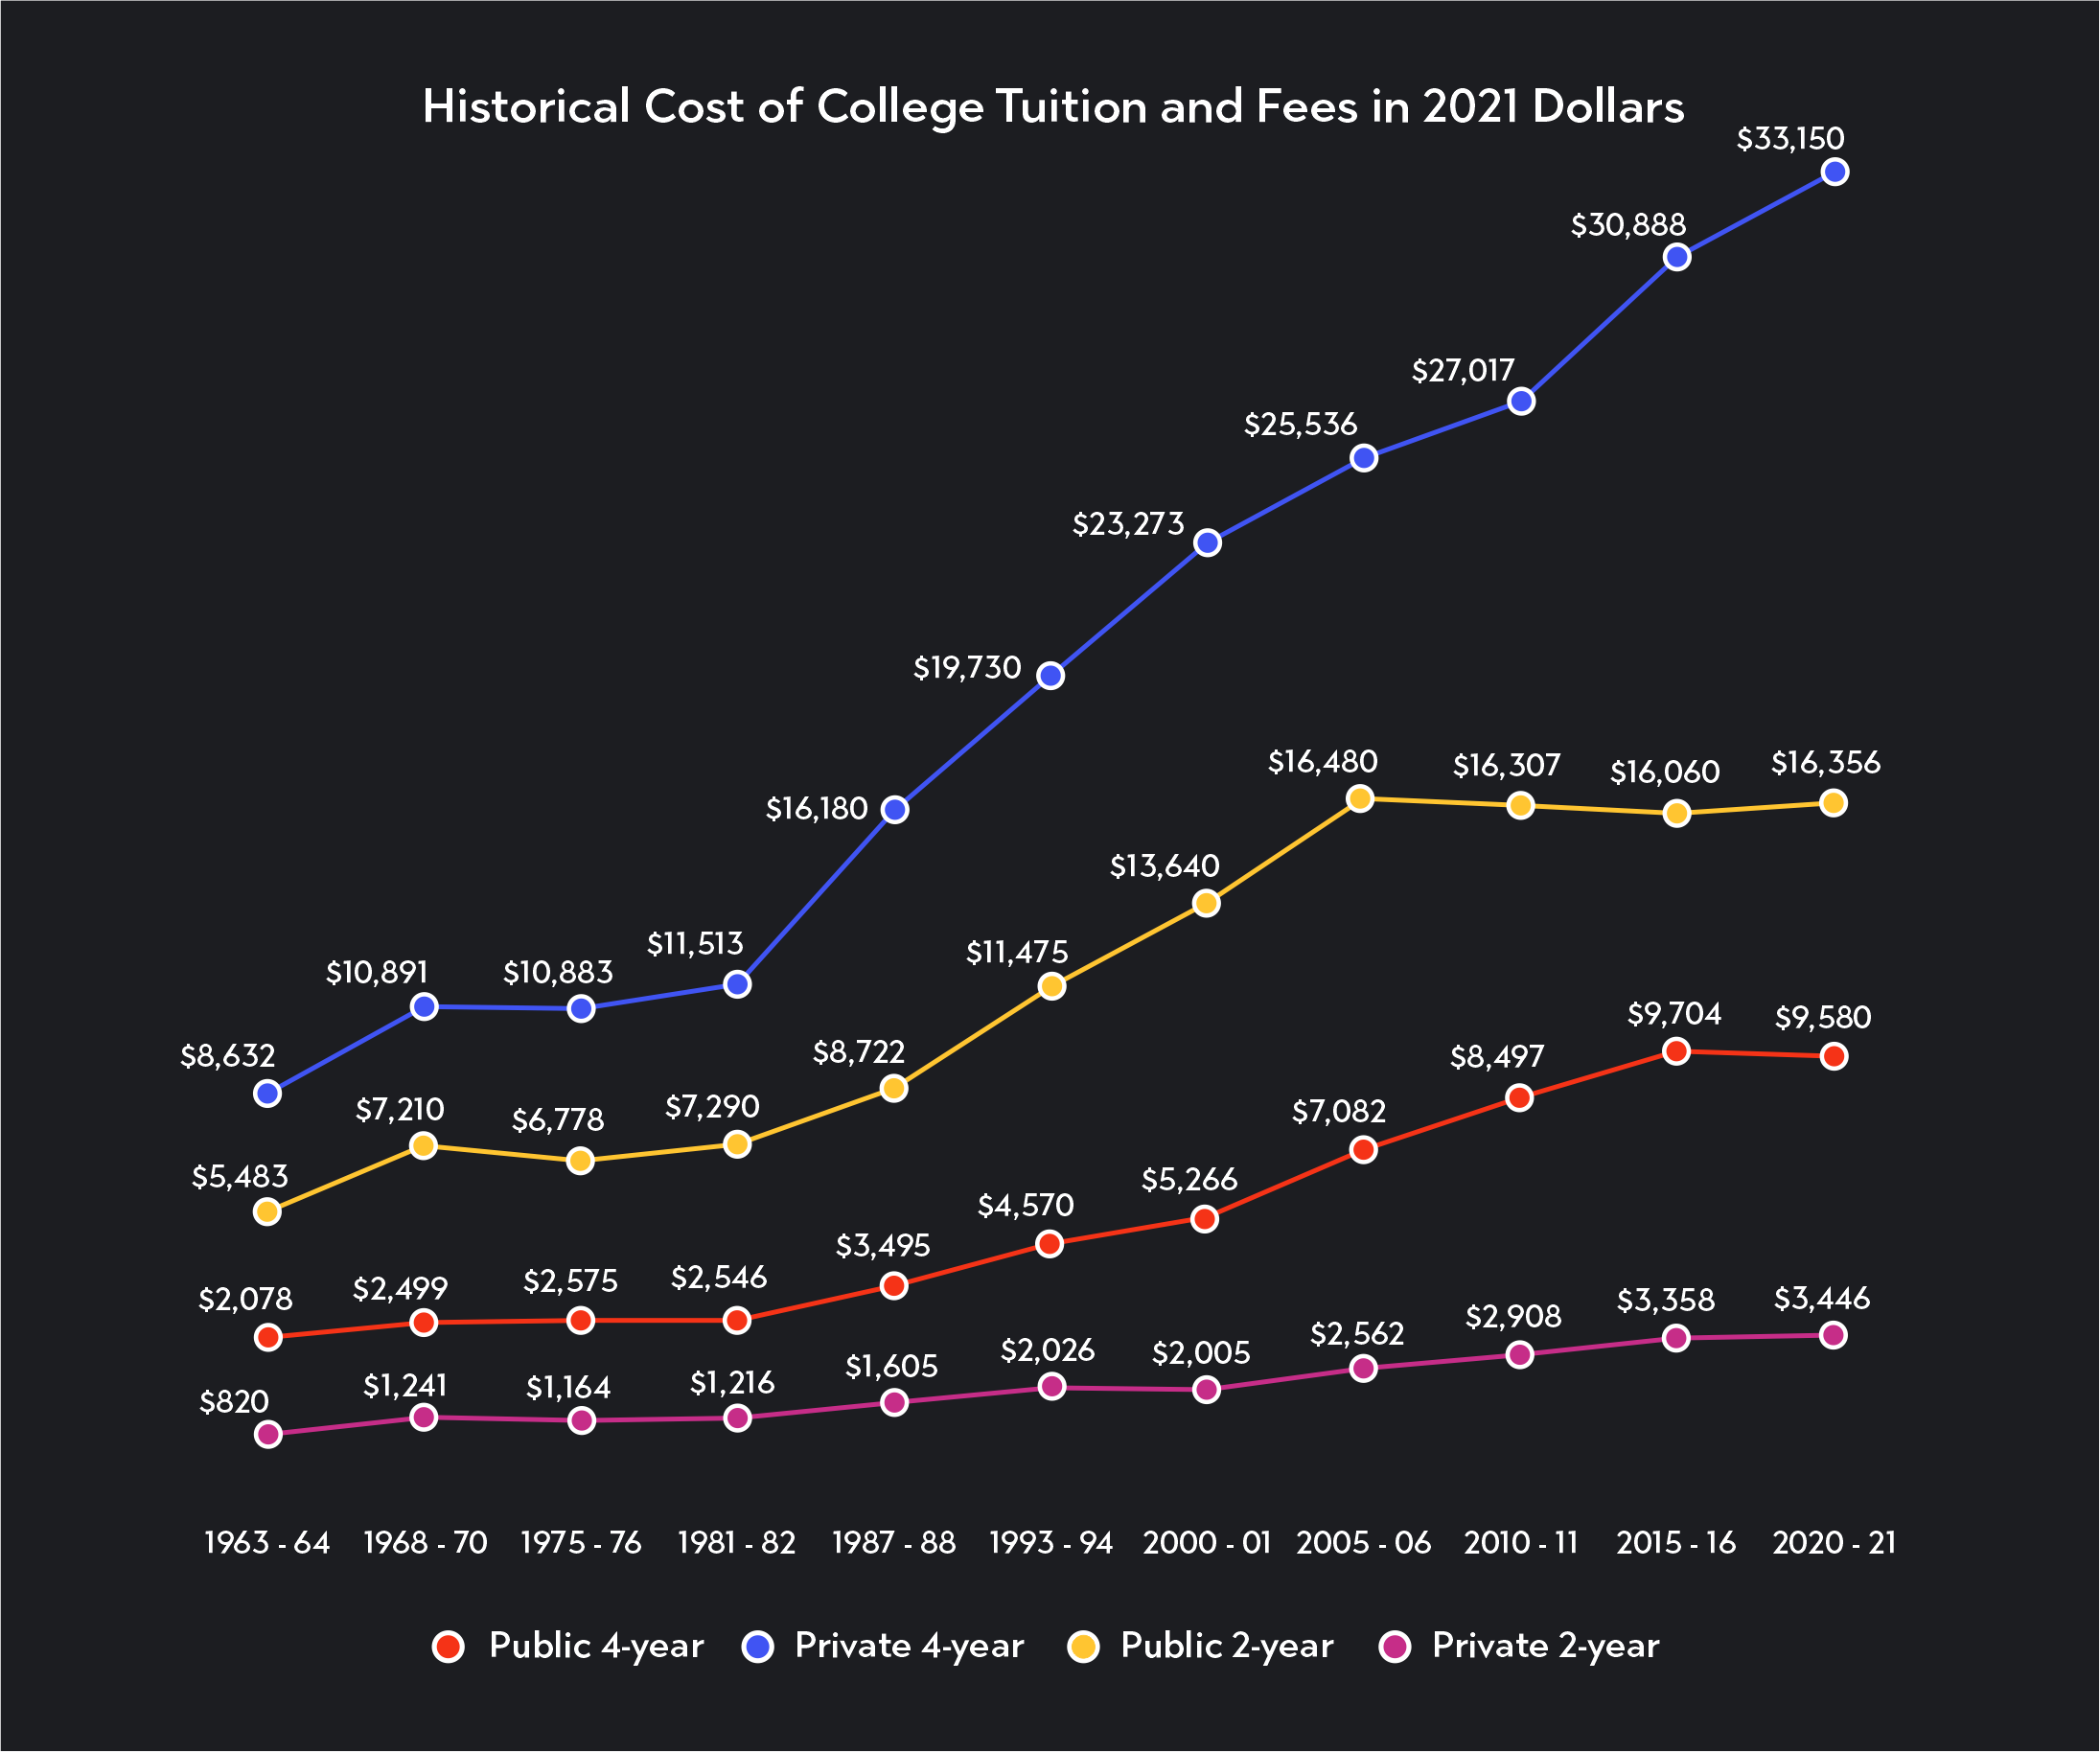 historical costs of tuition and fees in 2021 dollars